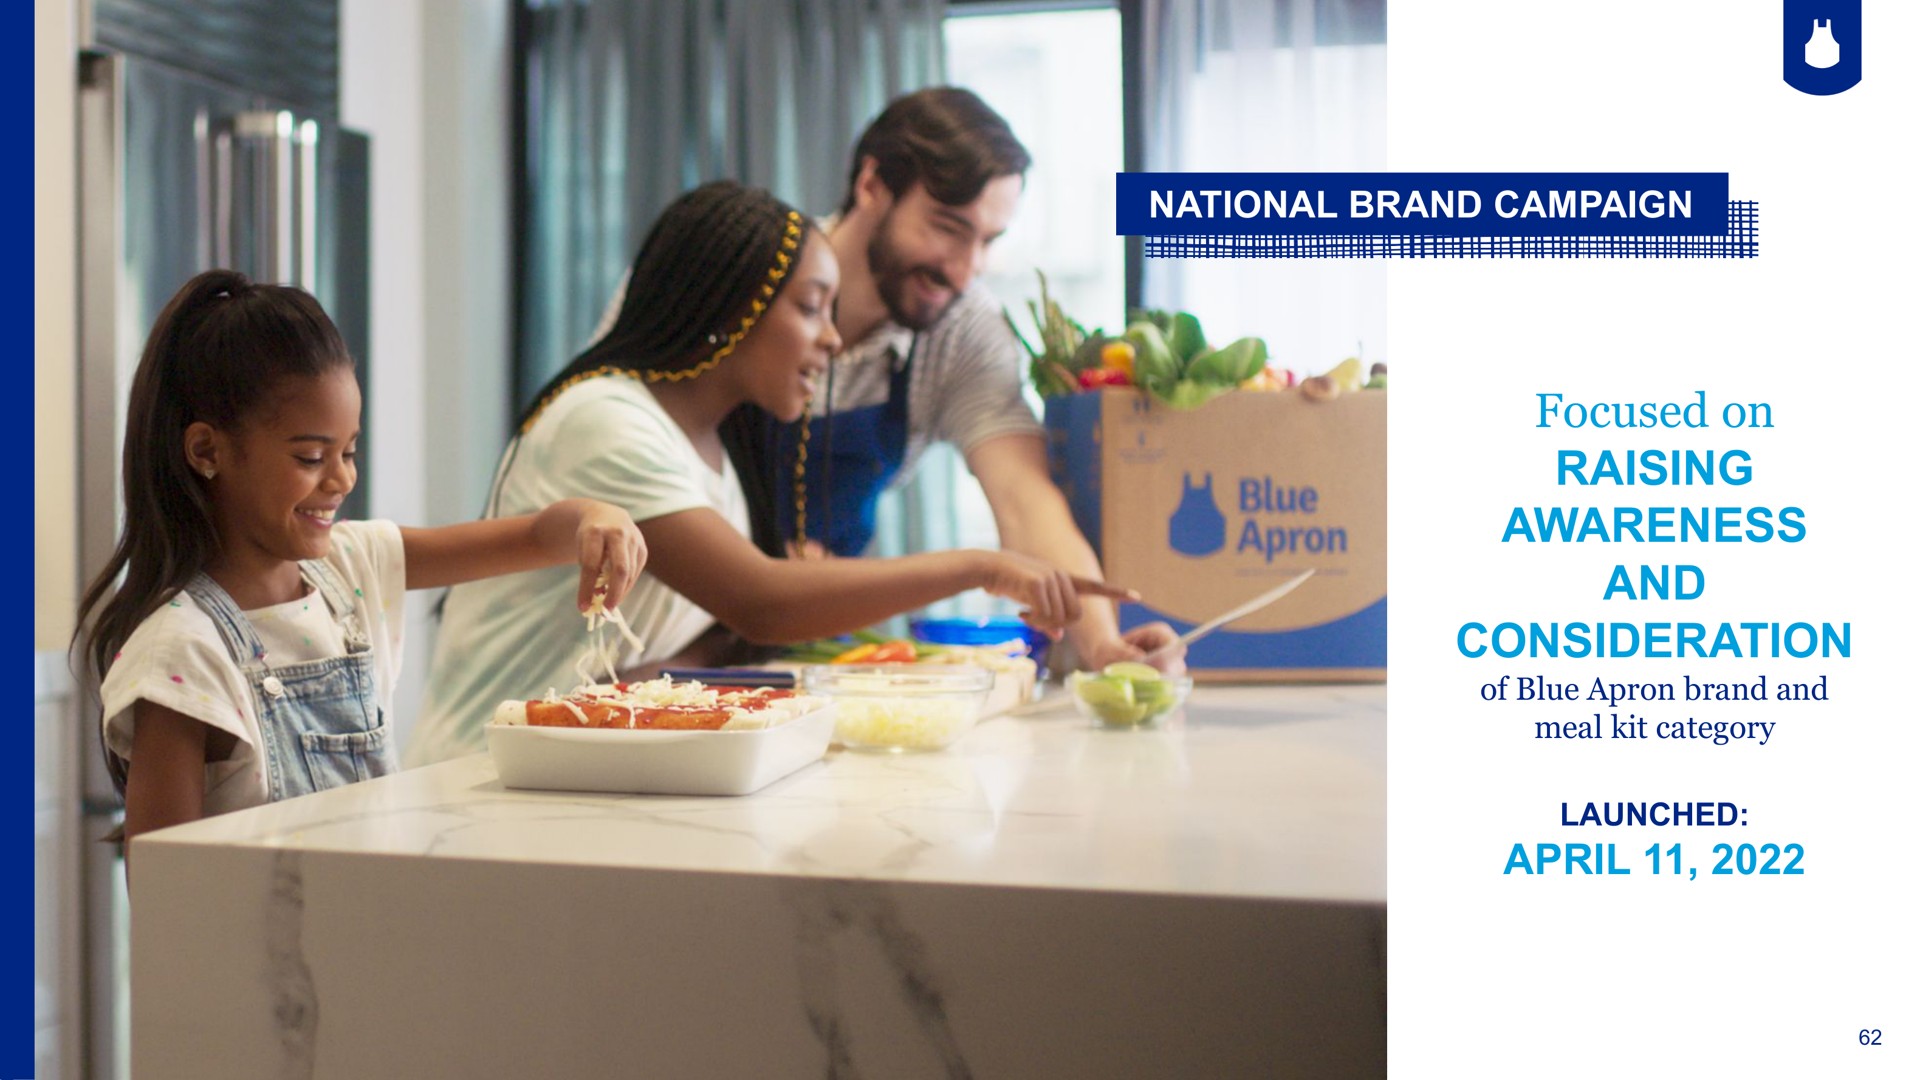 national brand campaign focused on raising awareness and consideration launched | Blue Apron